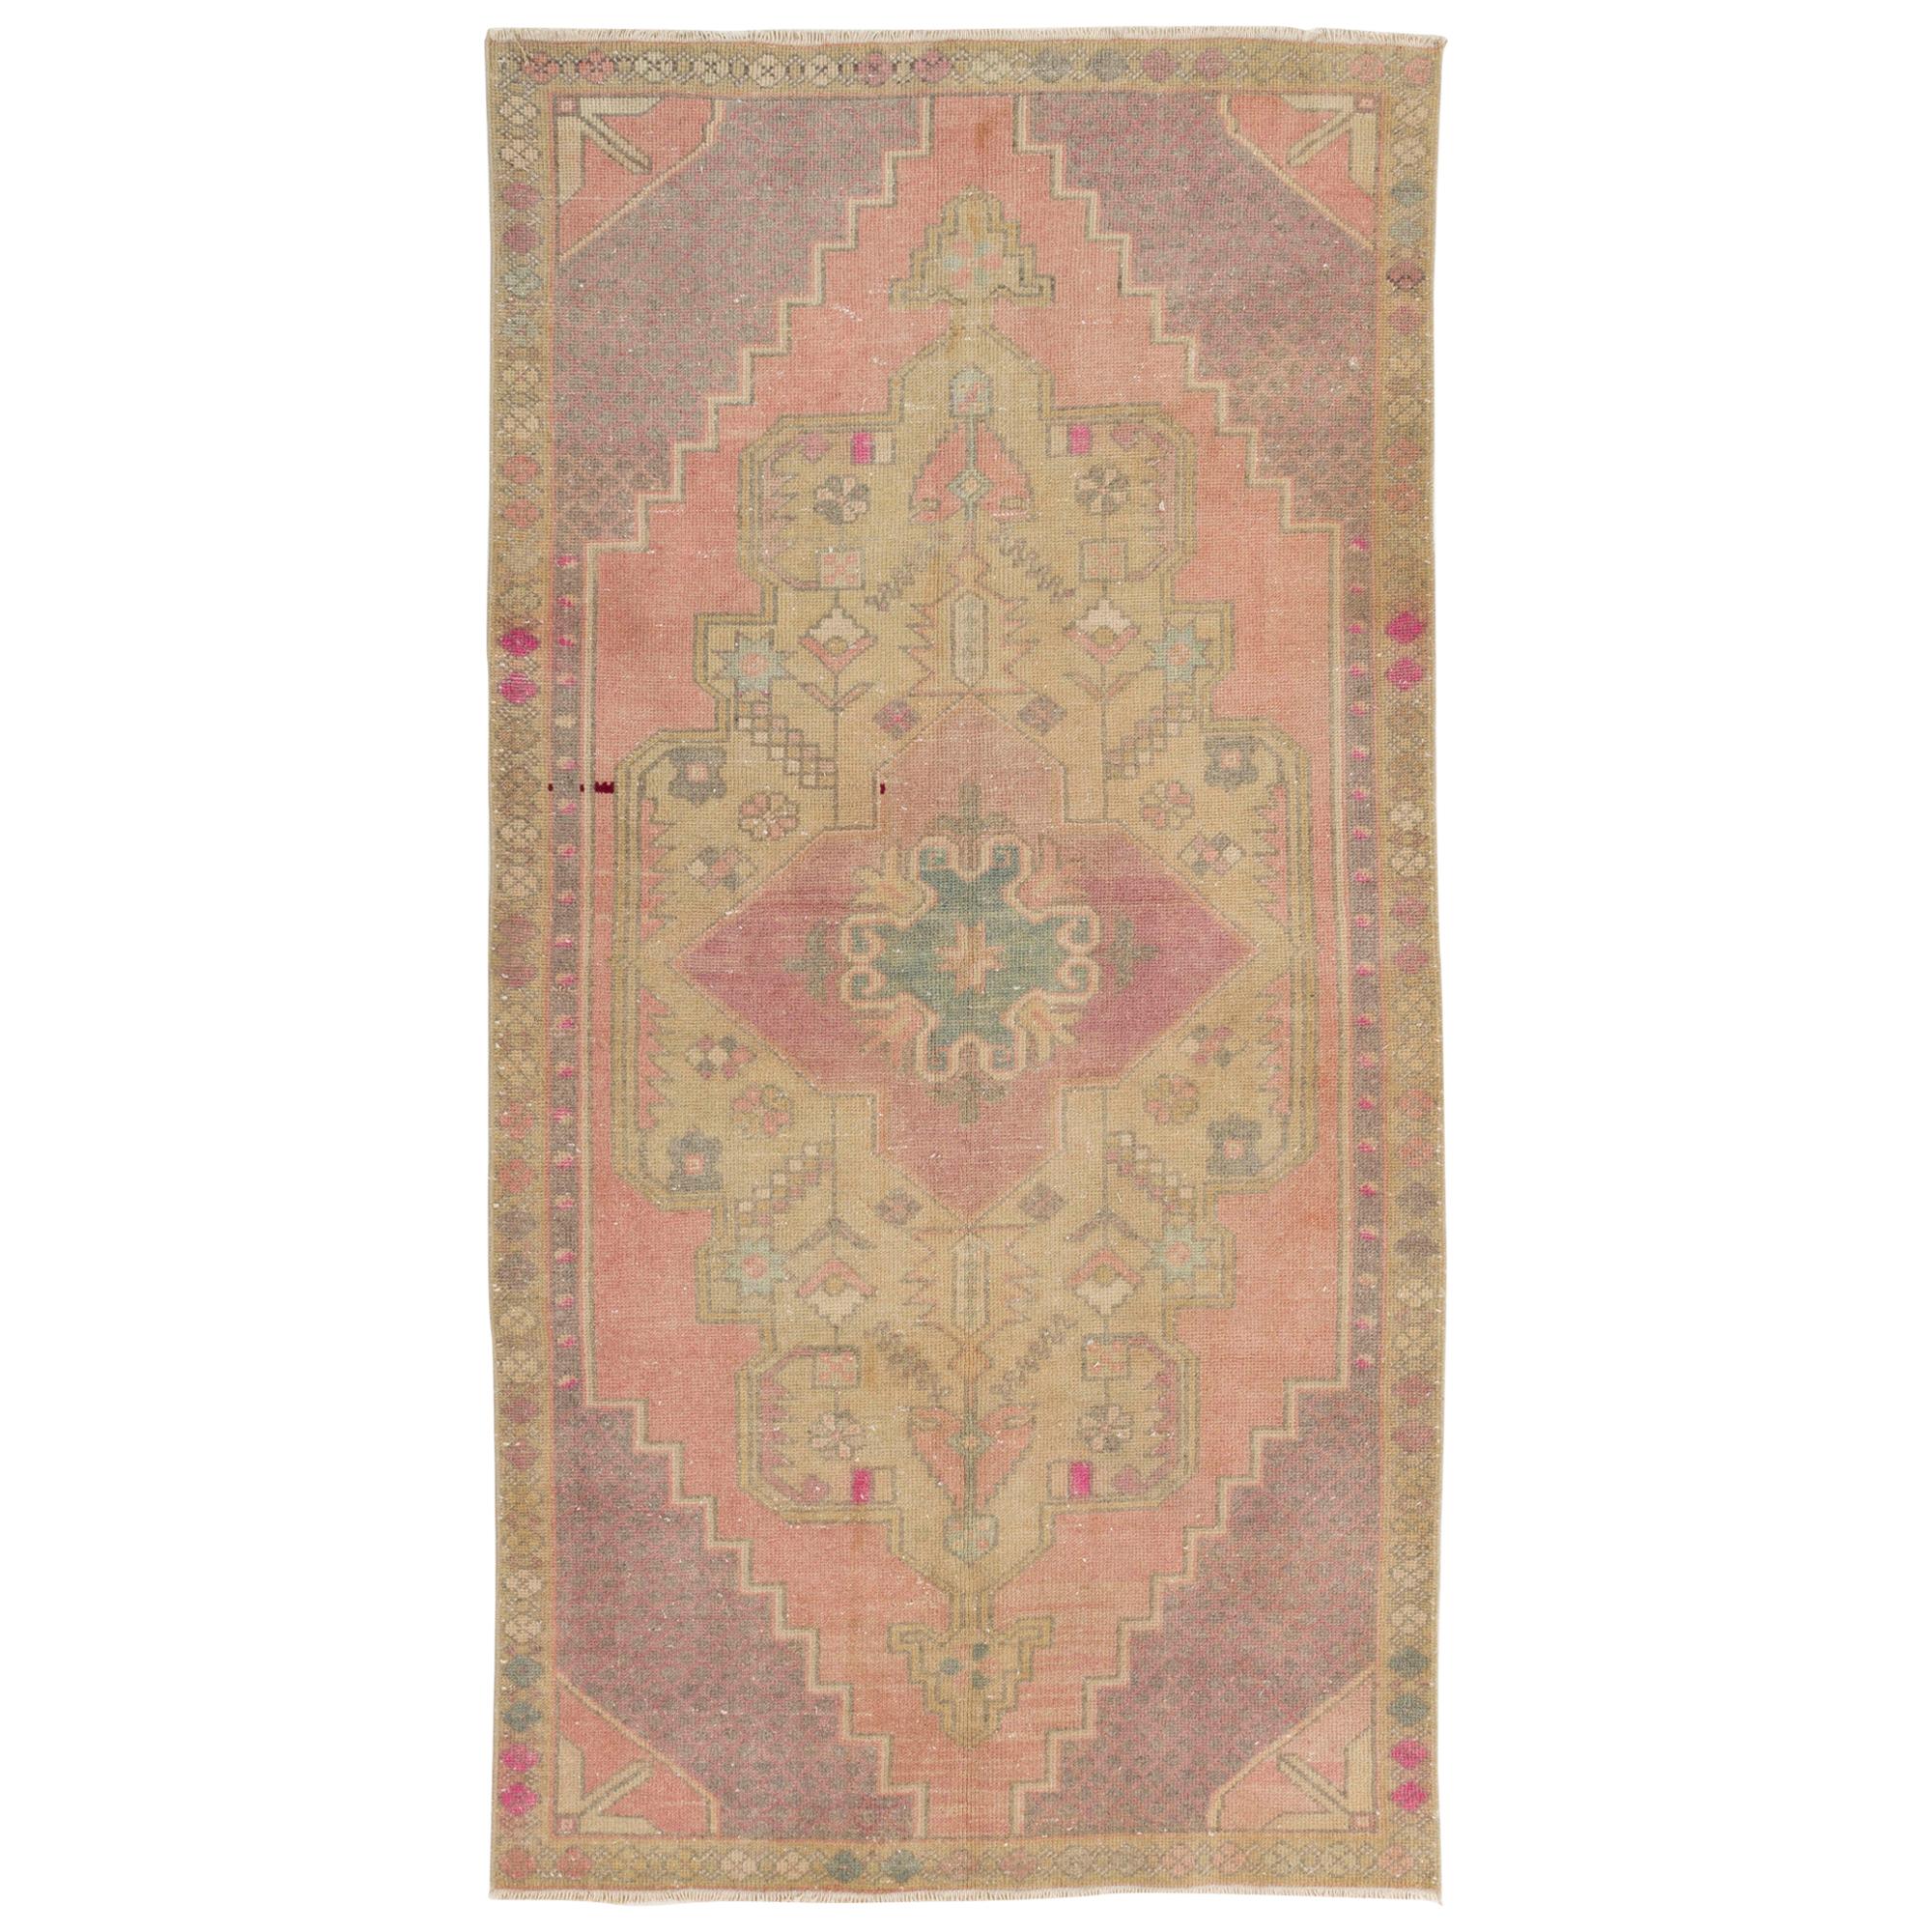 Vintage Hand Knotted Turkish Area Rug in Pink with Geometric Design. 4'4" x 8'4"